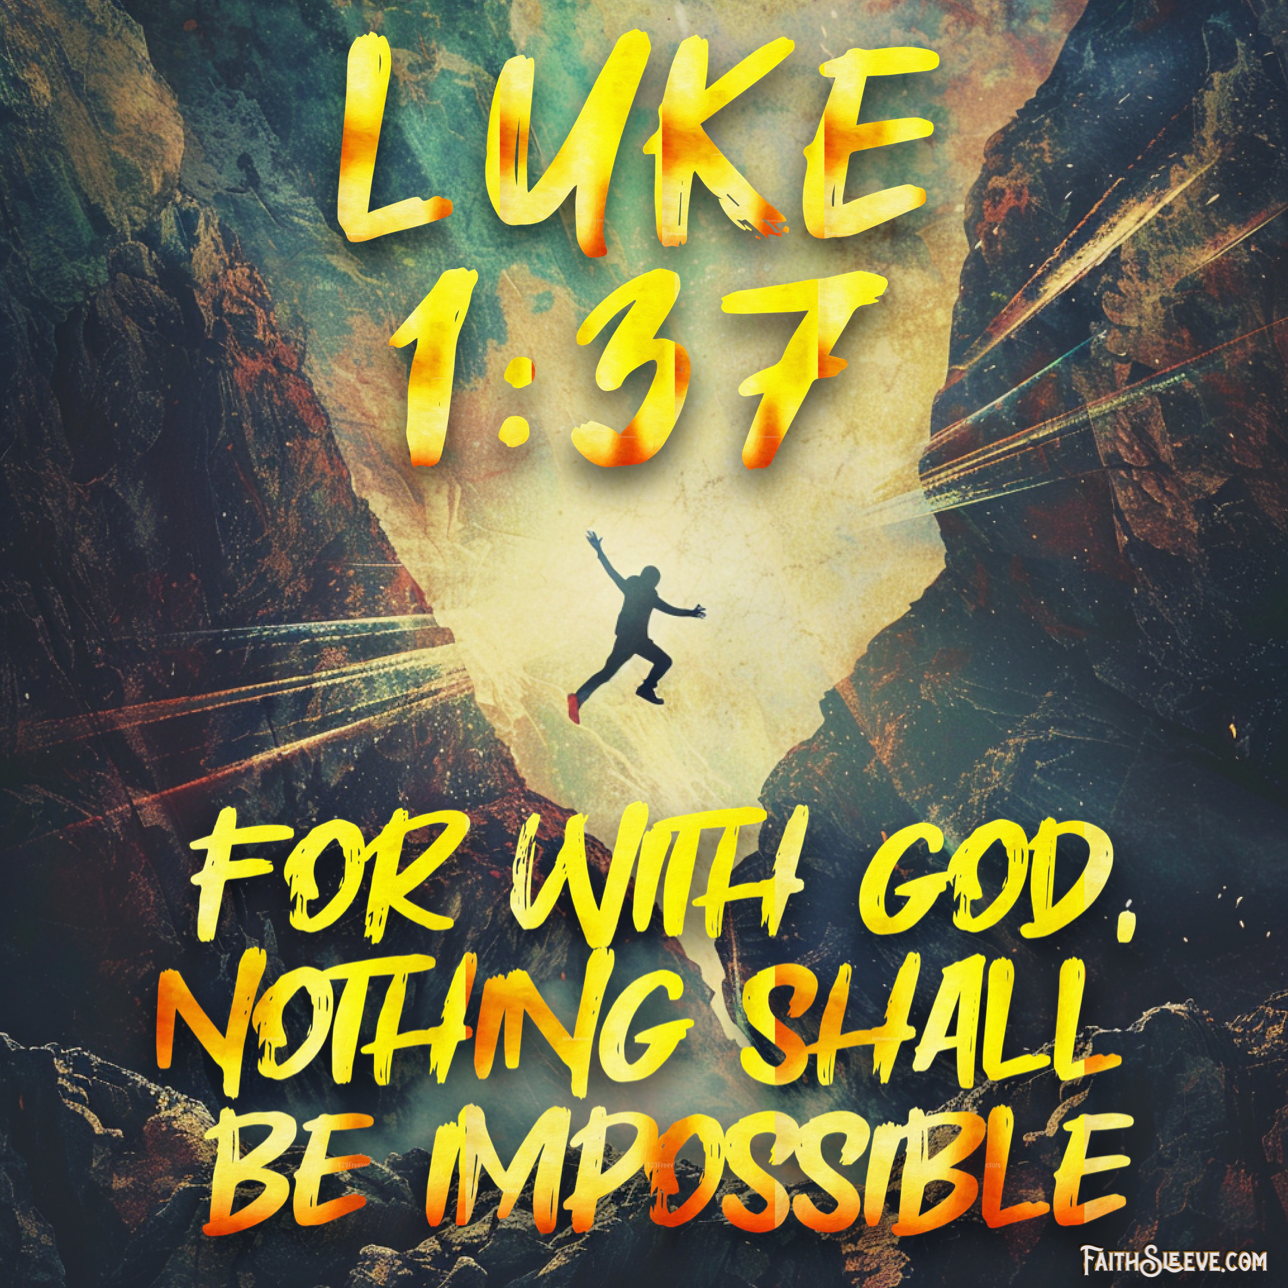 Luke 1:37 Bible Verse - Nothing Shall be Impossible